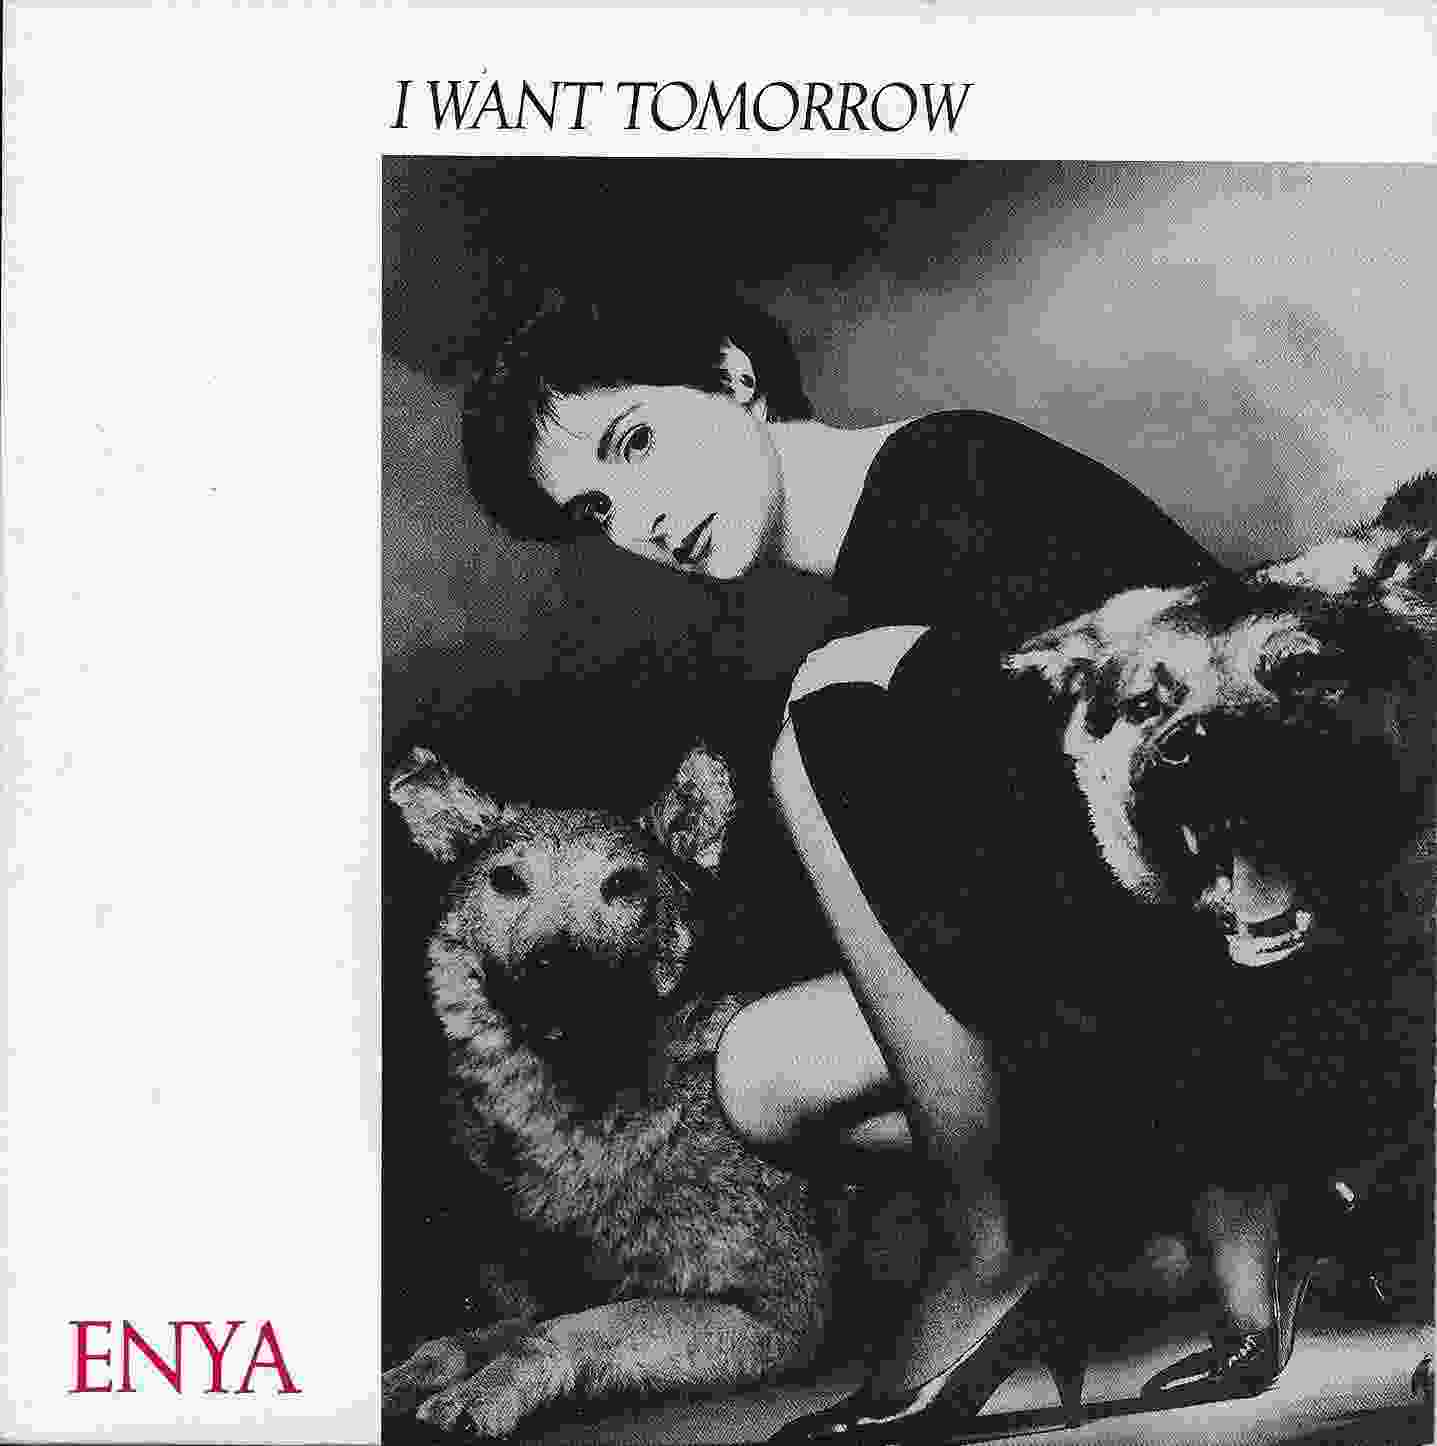 Picture of RESL 201 I want tomorrow (The Celts) by artist Enya from the BBC singles - Records and Tapes library